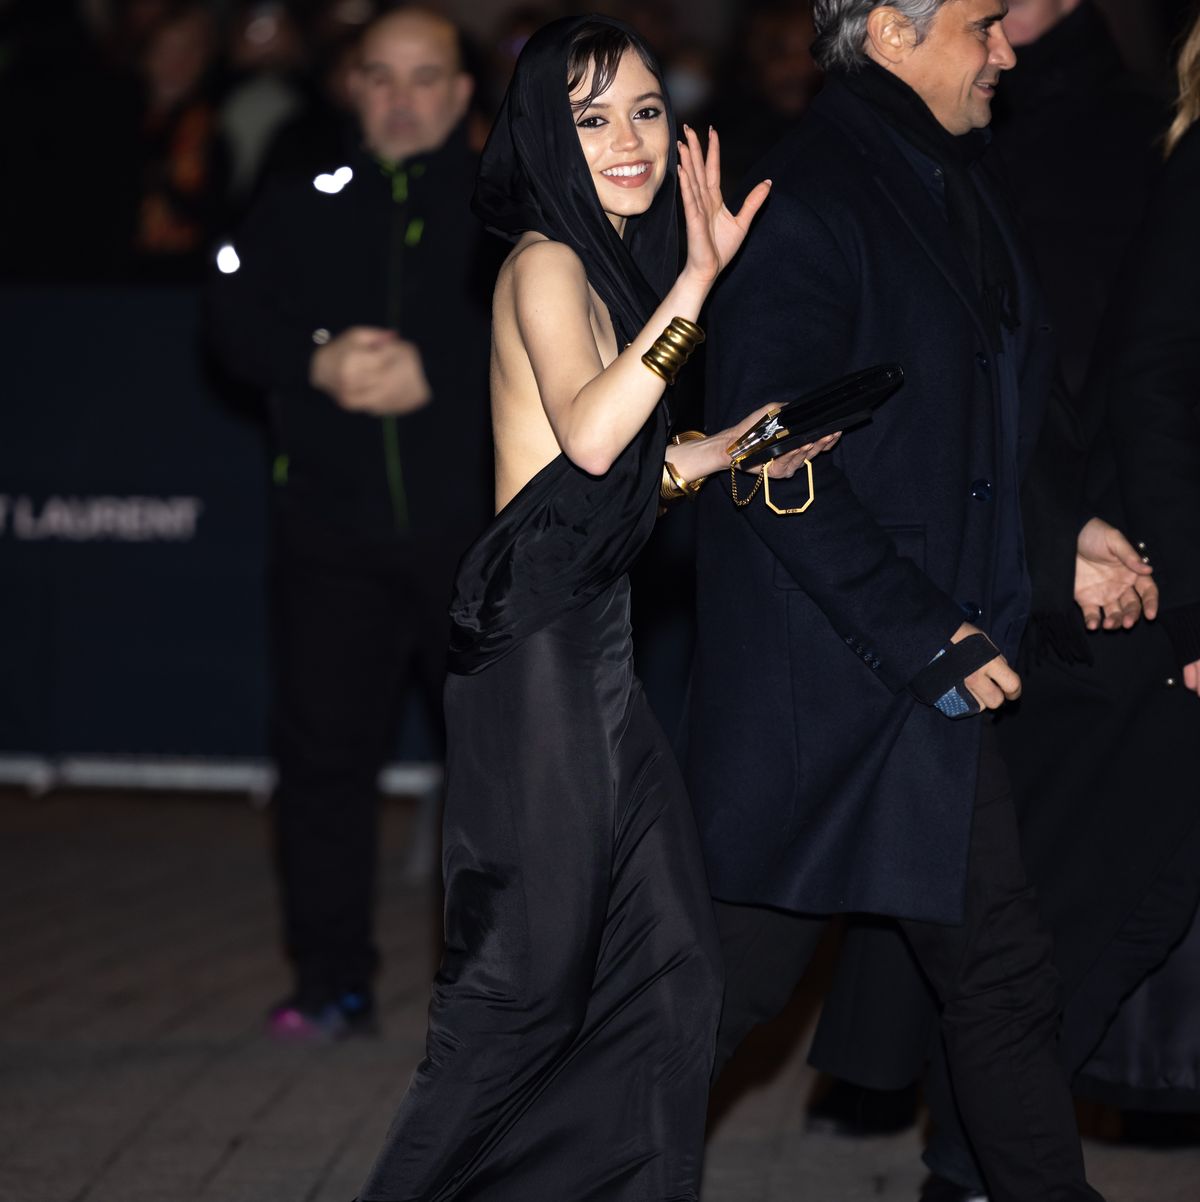 paris, france january 17 jenna ortega is seen during day one of paris fashion week menswear fall winter 2023 2024 on january 17, 2023 in paris, france photo by arnold jerockigetty images